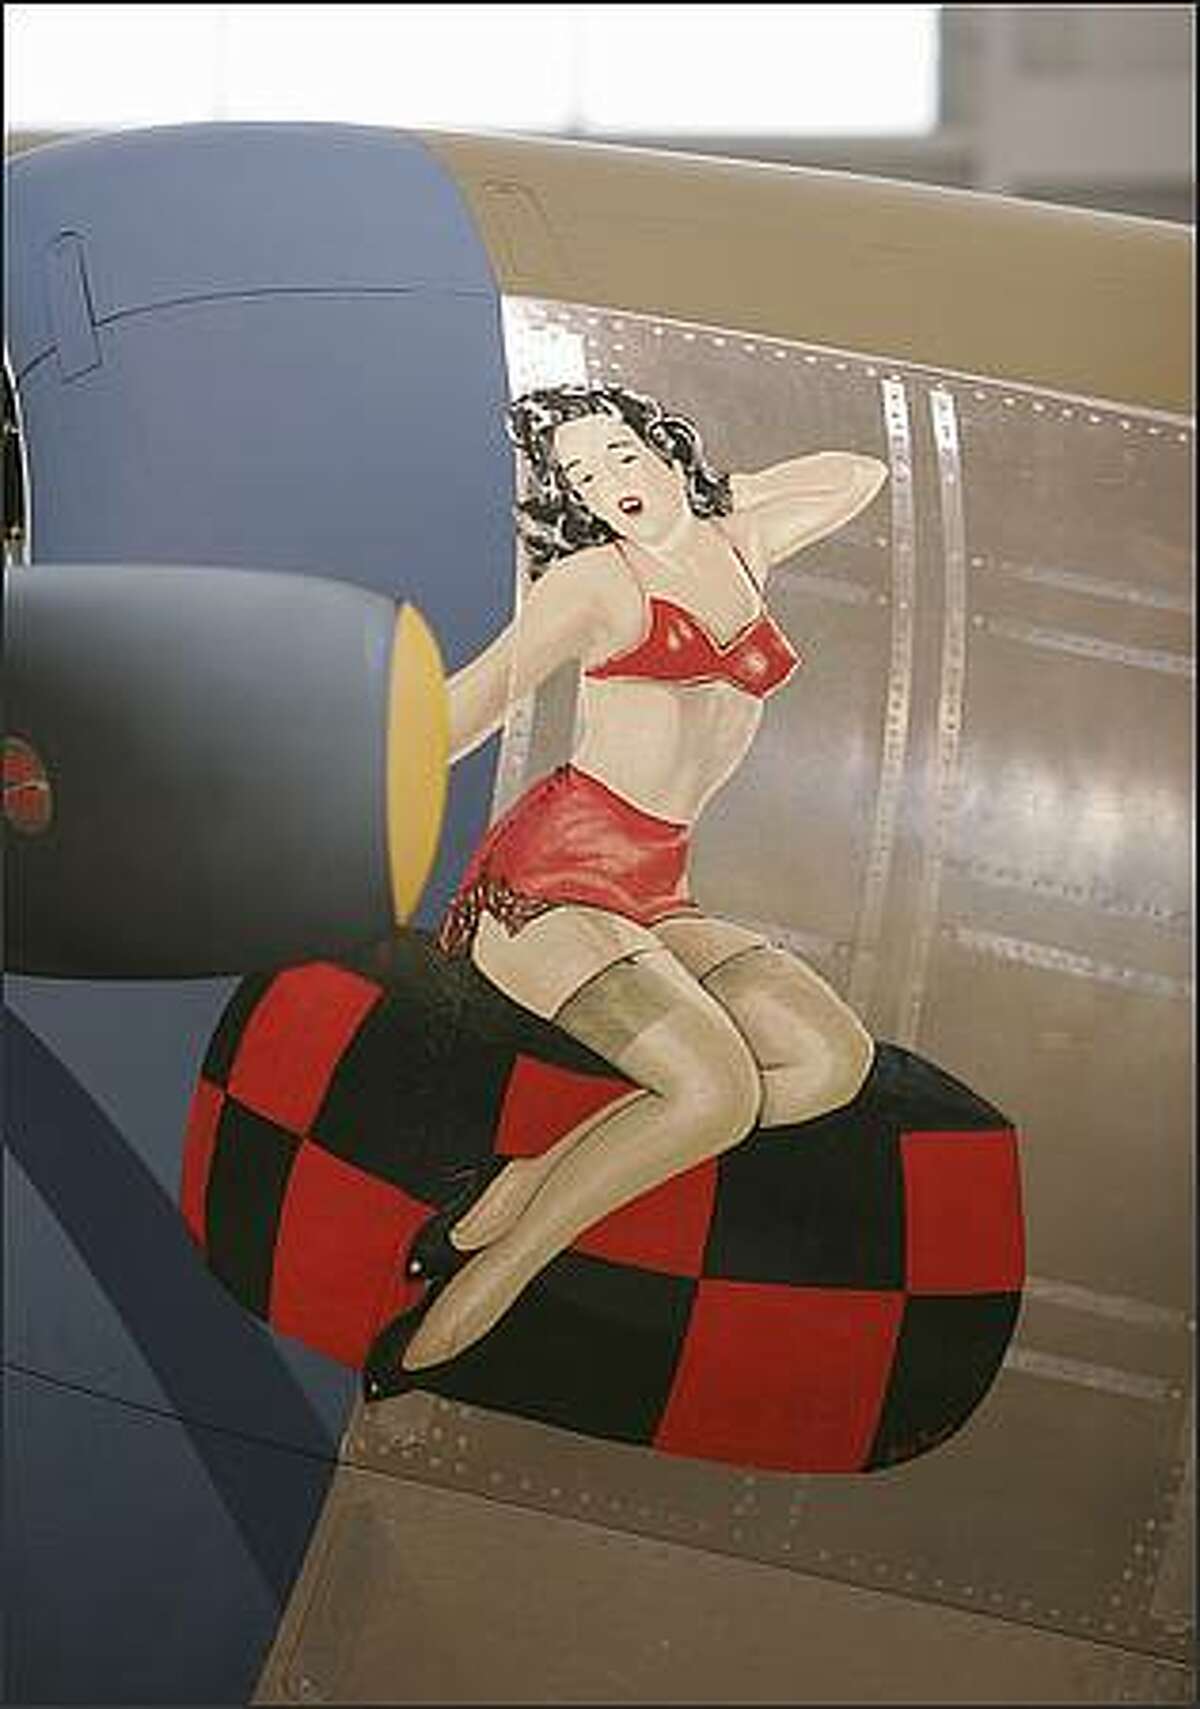 The P-47 Thunderbolt during WW II was named "Tallahassee Lassie", for Tiero Jenkins of Seattle. The plane is located at the Flying Heritage Collection in Everett.